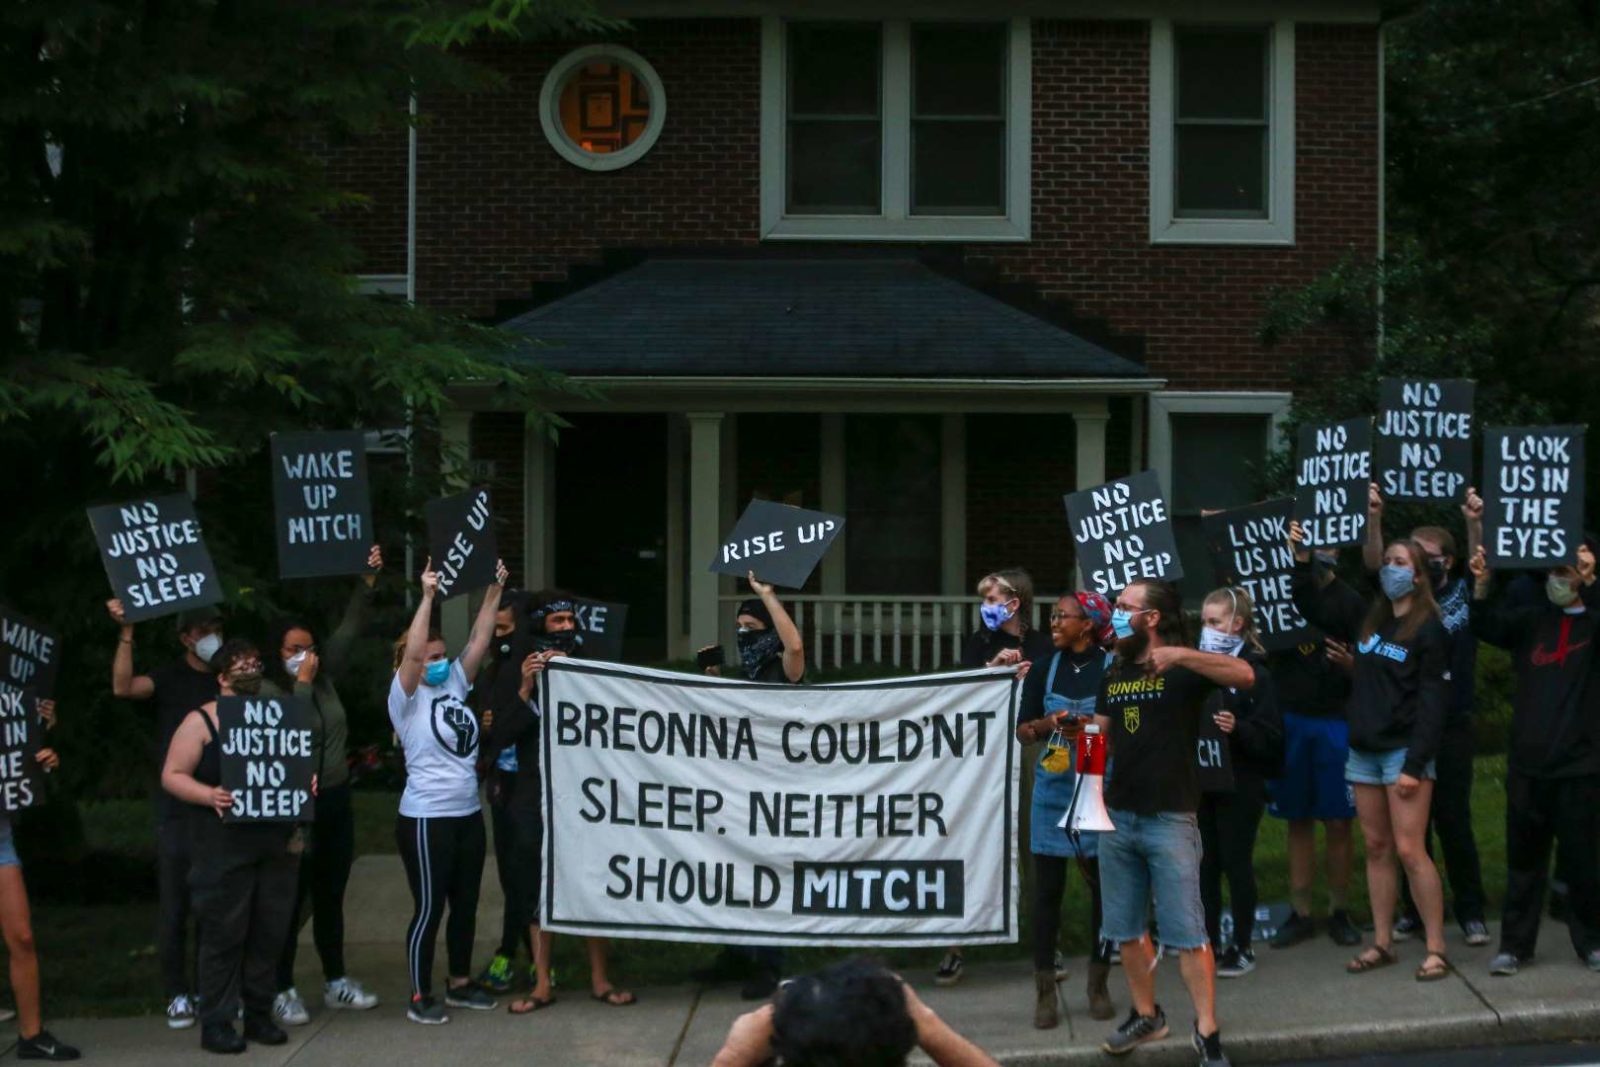 Sunrise activists demonstrate in front of Mitch McConnell's KY house, holding a large sign saying "Breonna Couldn't Sleep. Neither Should Mitch".